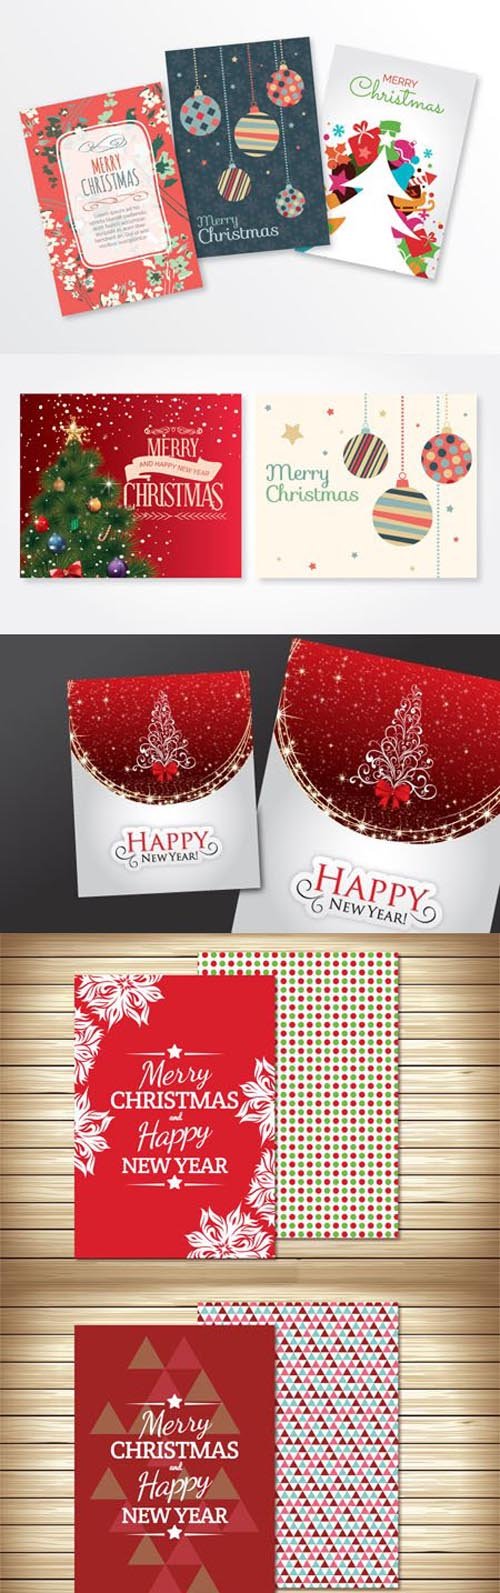 Christmas & Happy New Year! Greeting Cards